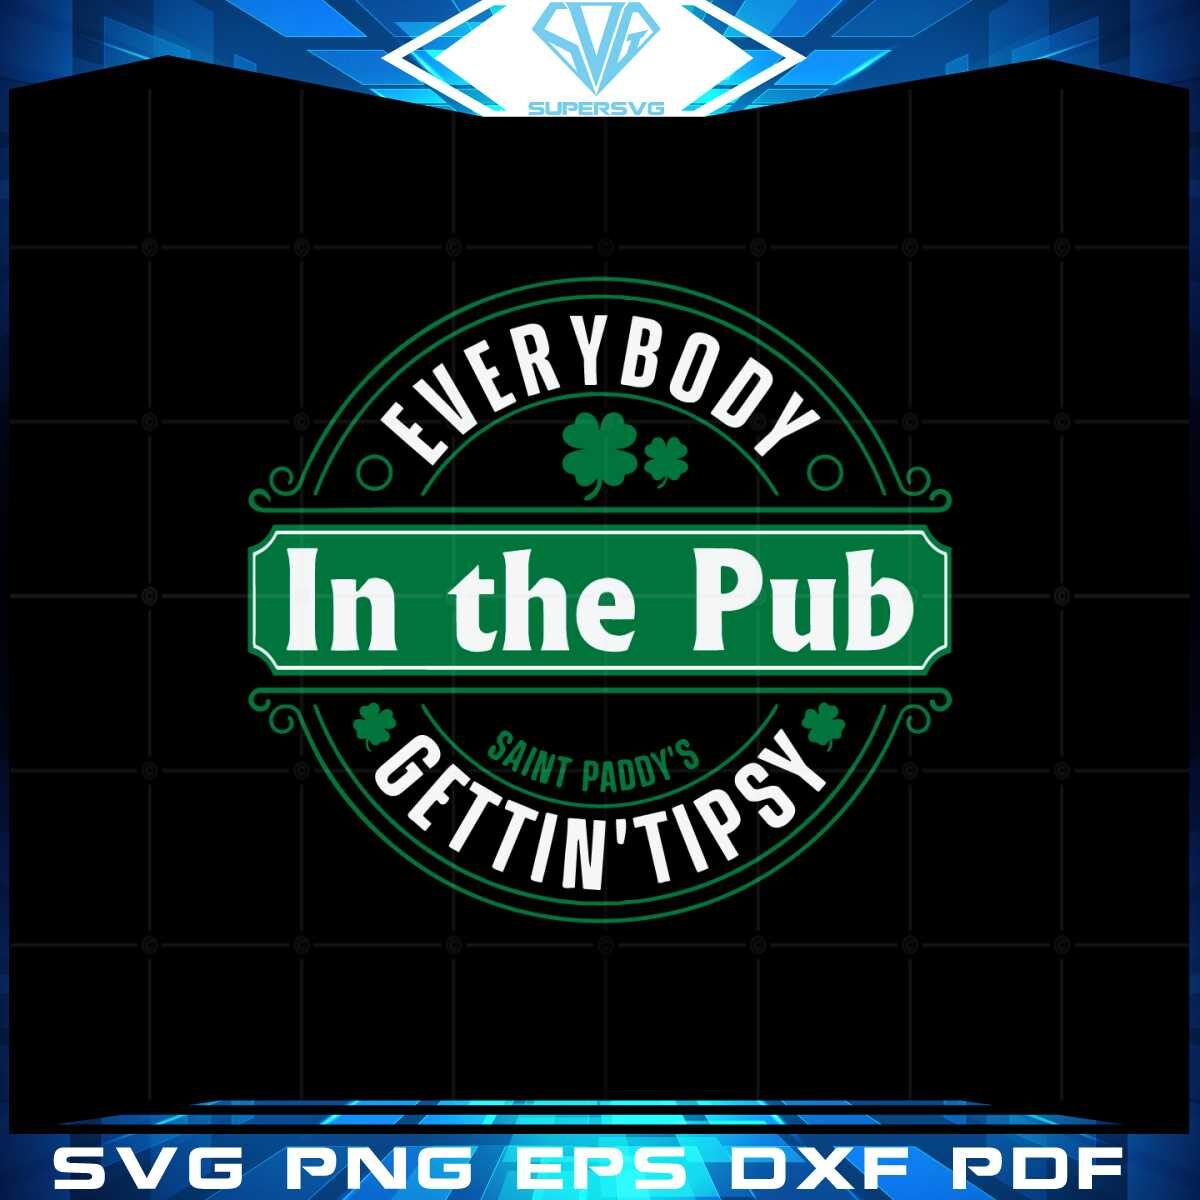 everybody-in-the-pub-getting-tipsy-funny-svg-cutting-files